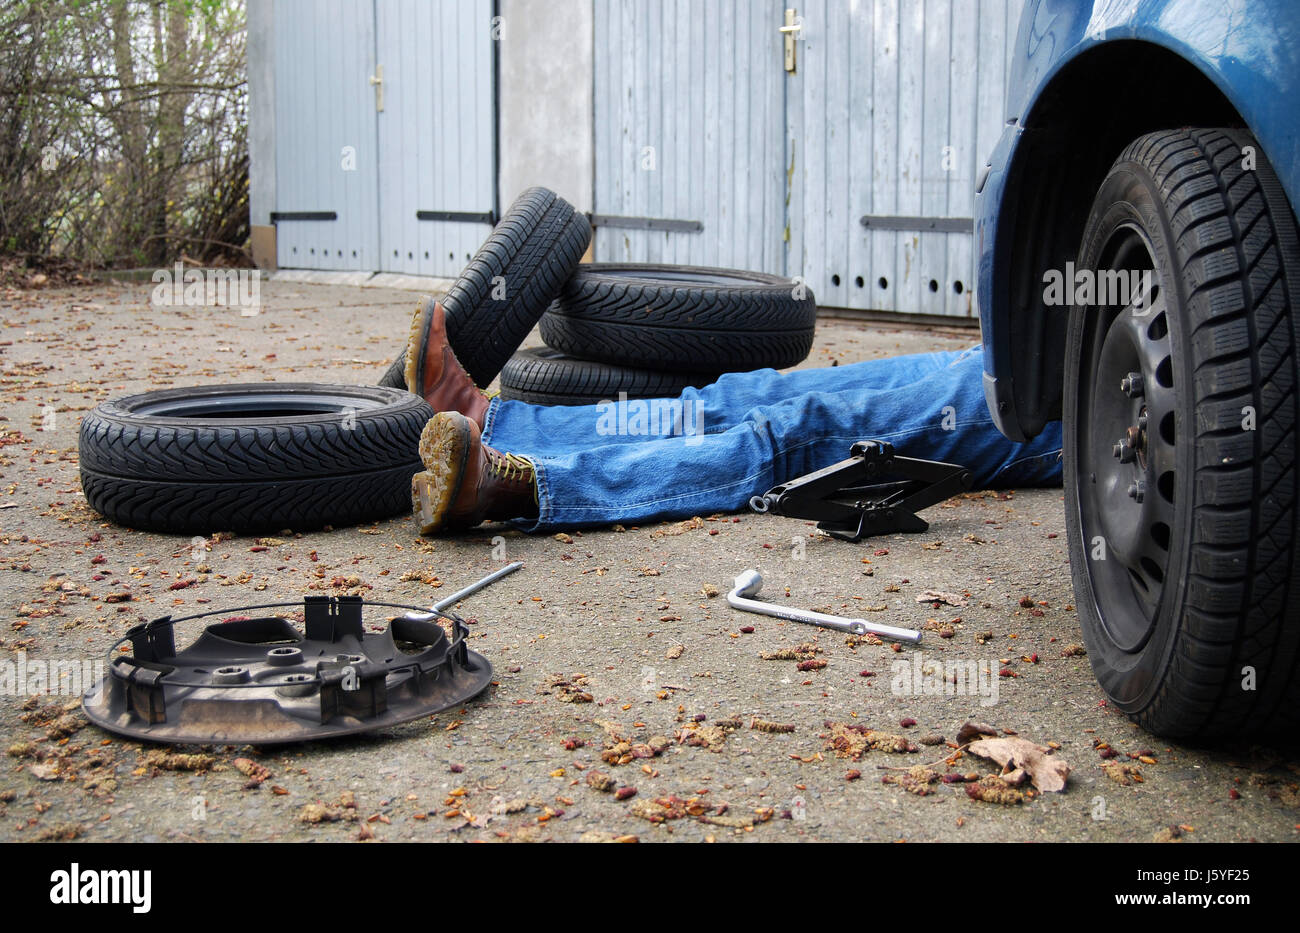 chaos layman change of tyres hub cap tyre tire tyres exhausted man make tool Stock Photo